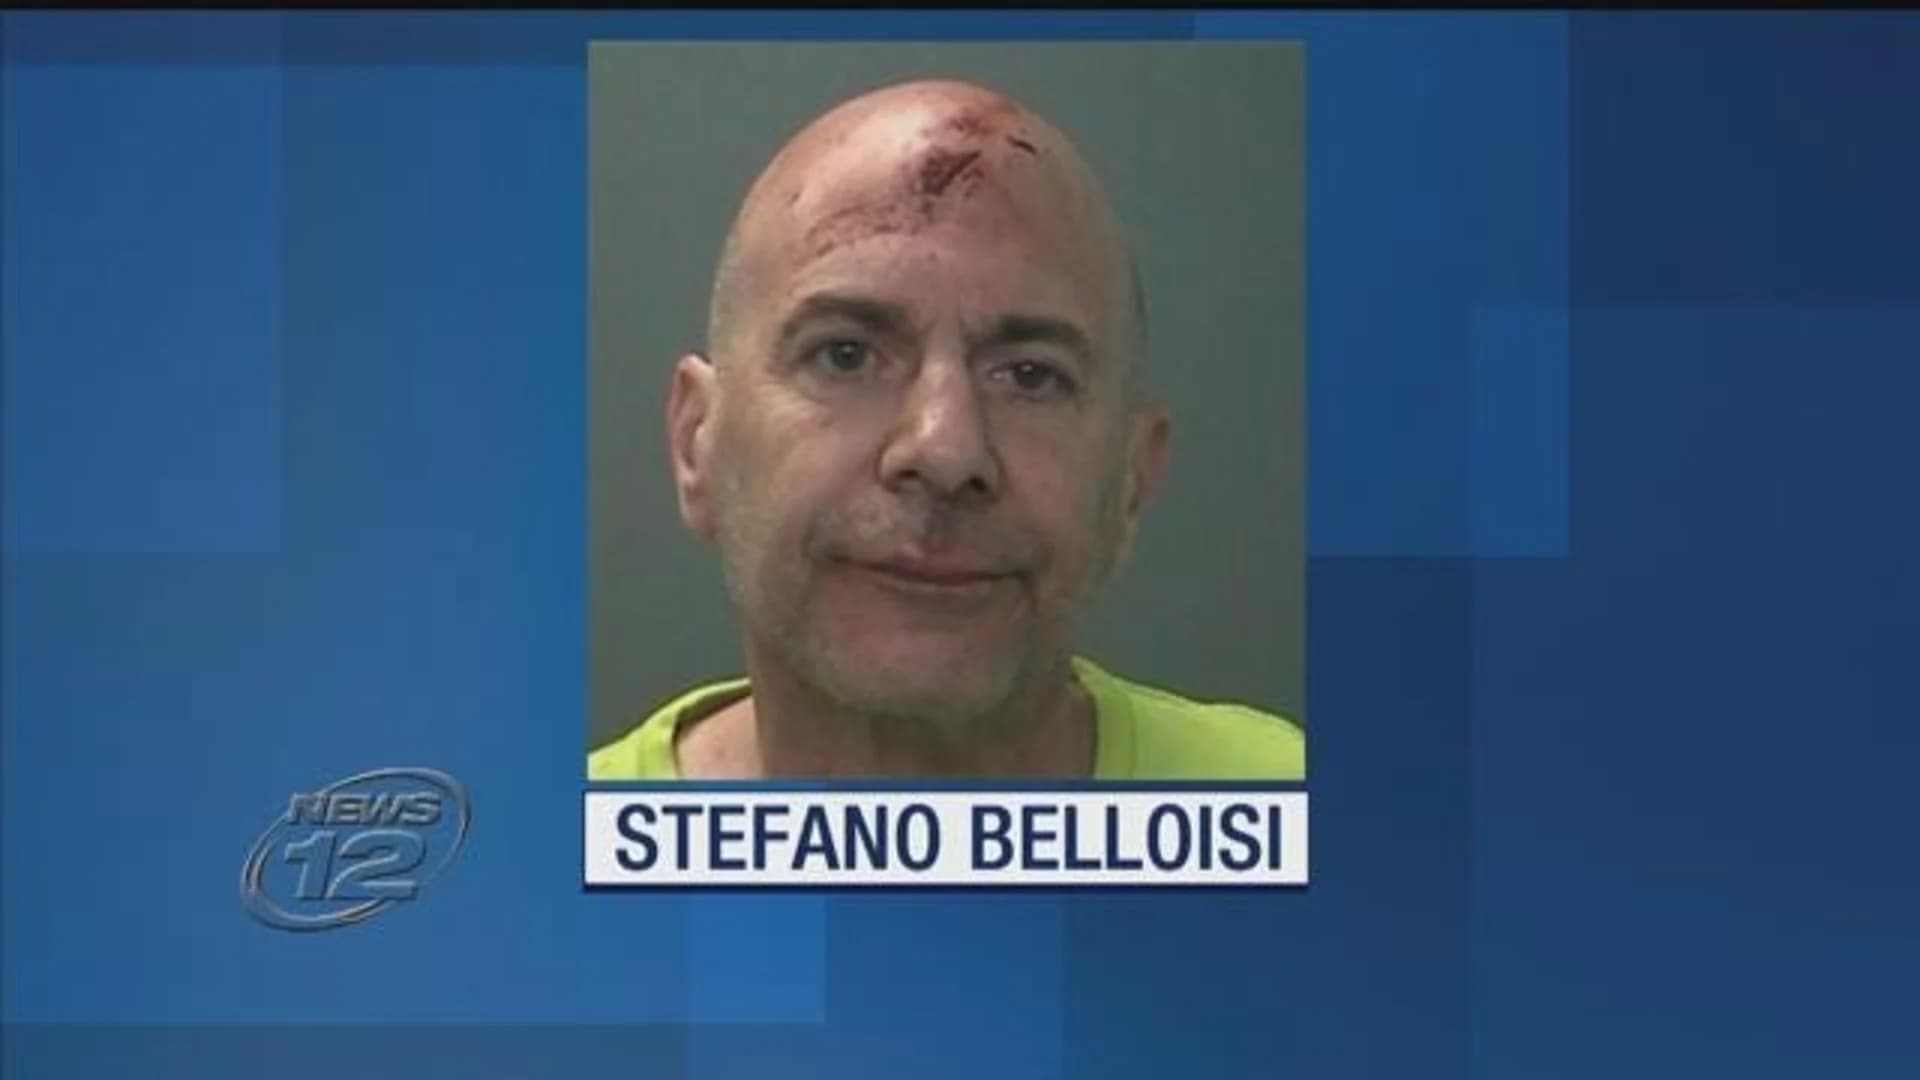 Man faces felony charges after striking postal worker with car